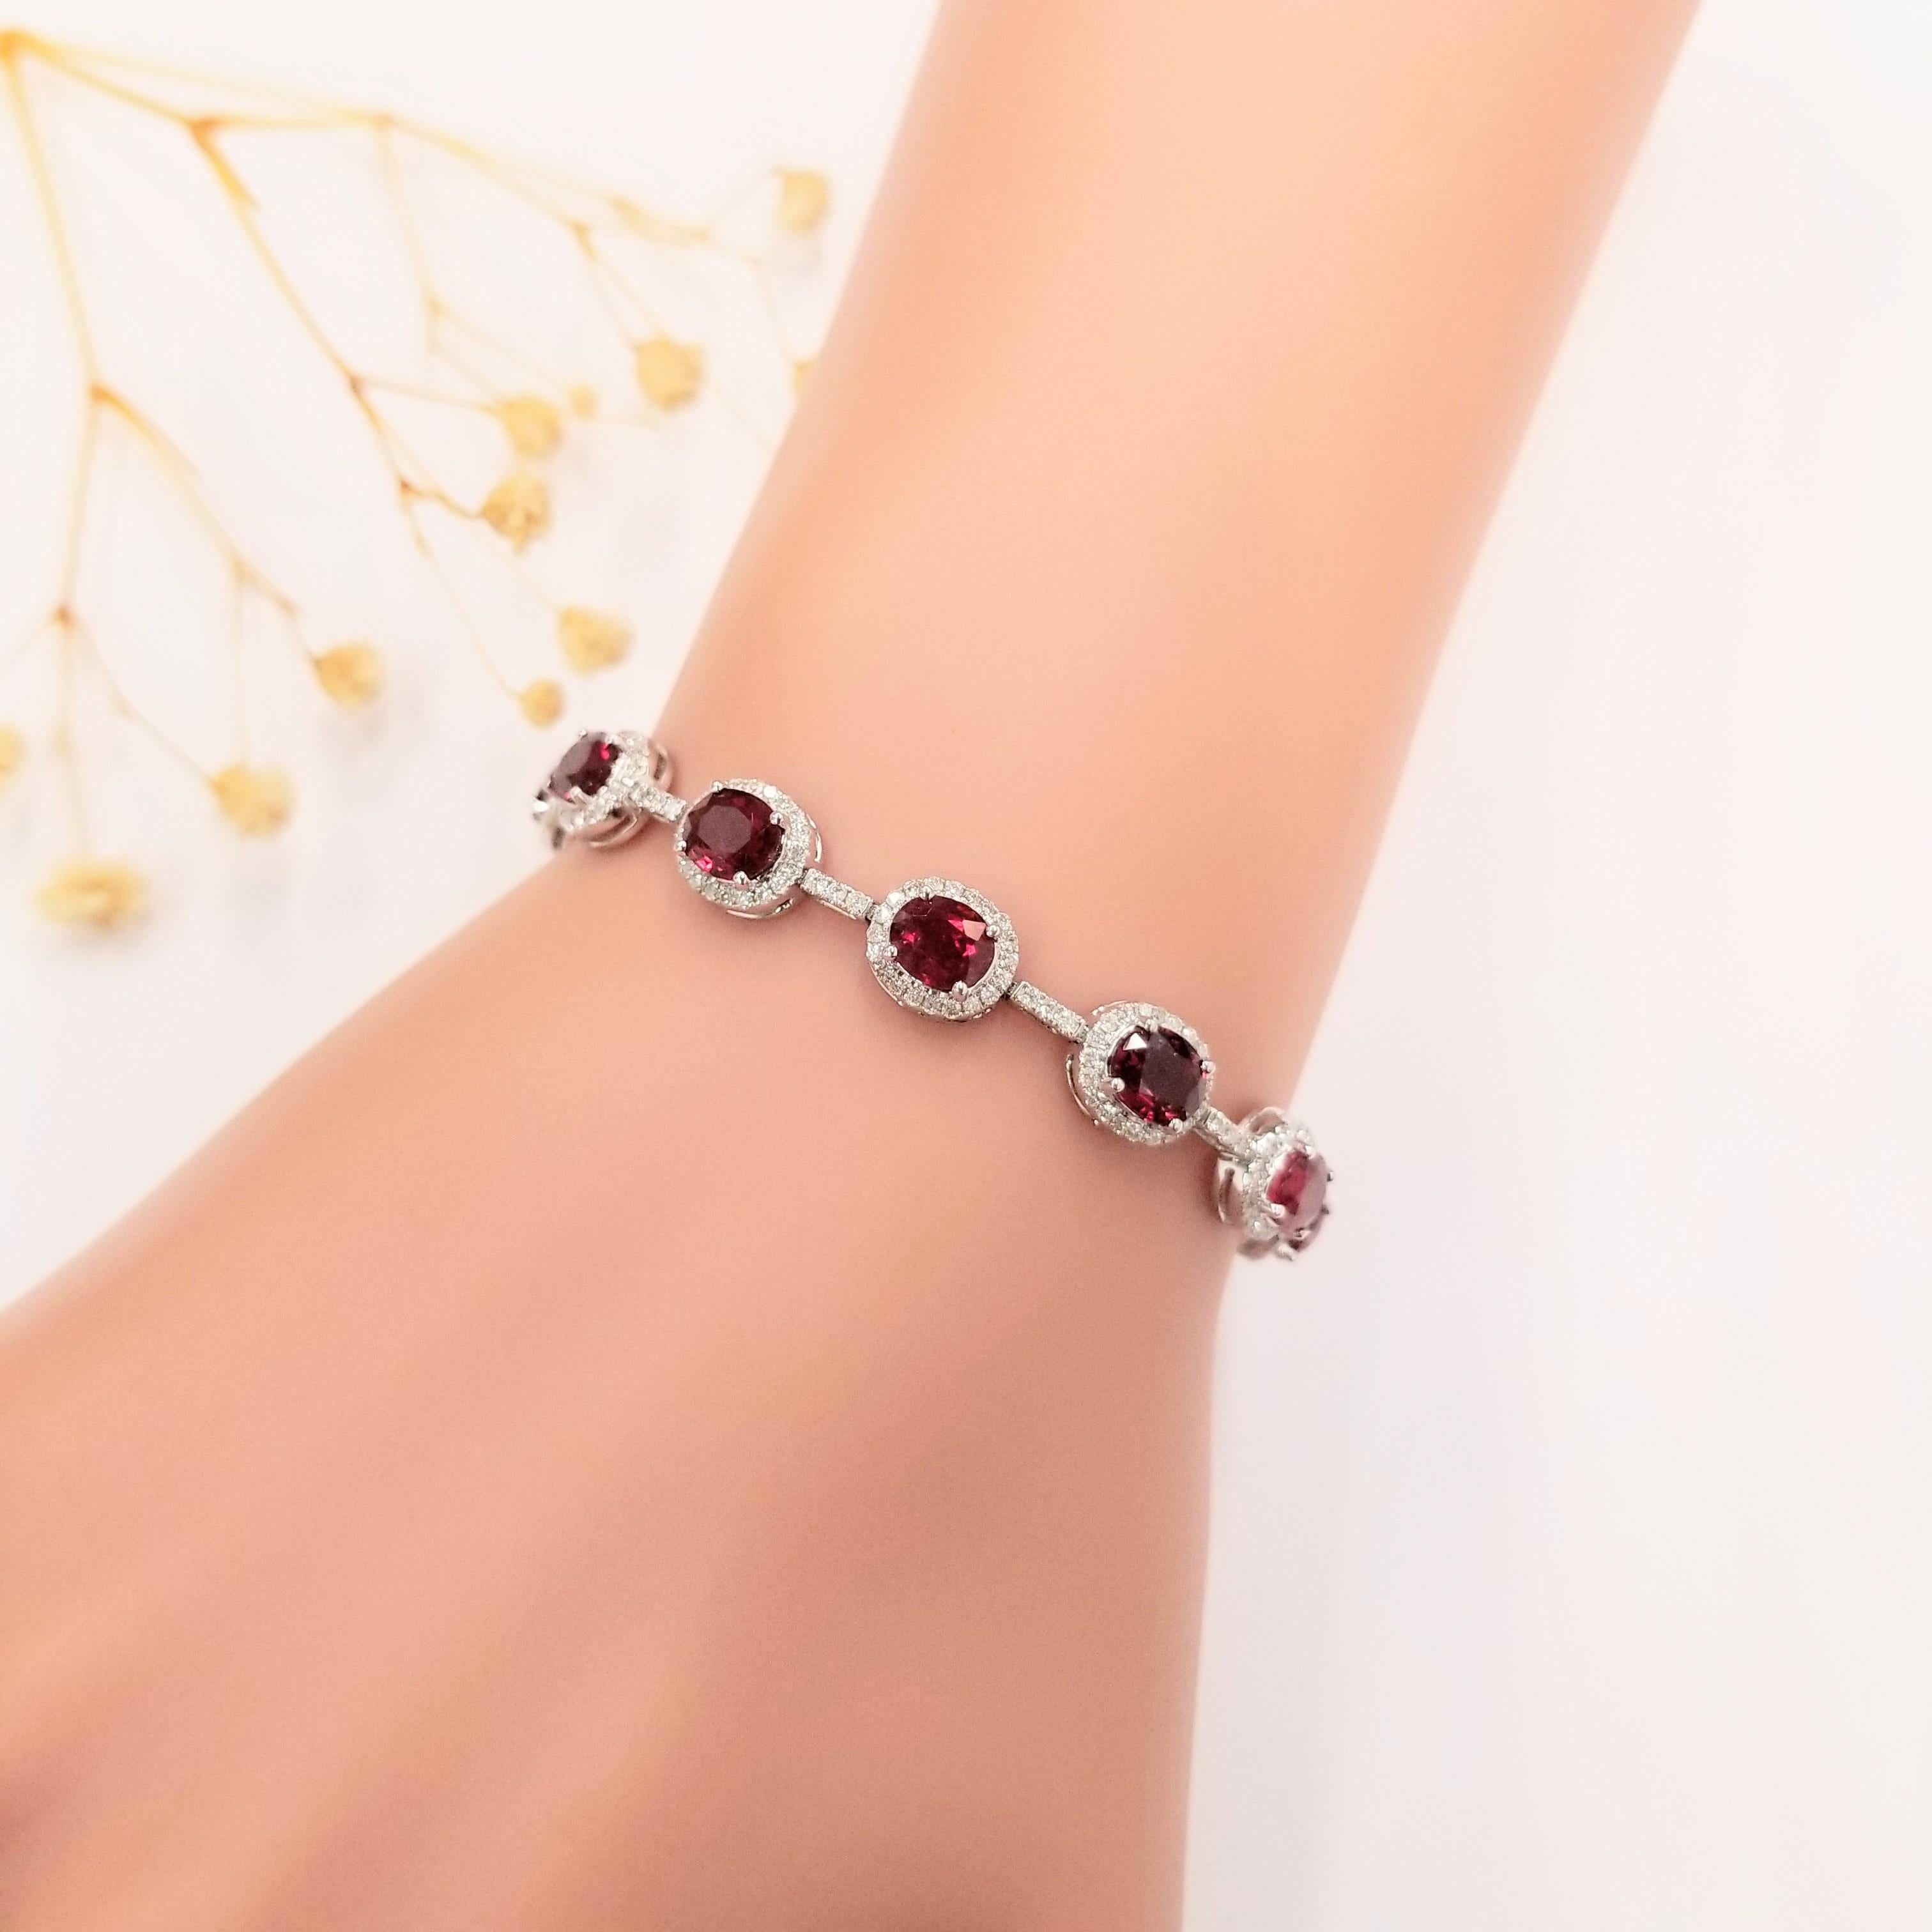 Introducing the dazzling IGI Certified 10.55 Ct Ruby & Diamond Bracelet in 18K Gold. This breathtaking piece features exquisite oval-shaped rubies, originating from Mozambique, elegantly encased in diamond halos. Connected by a diamond bar, this